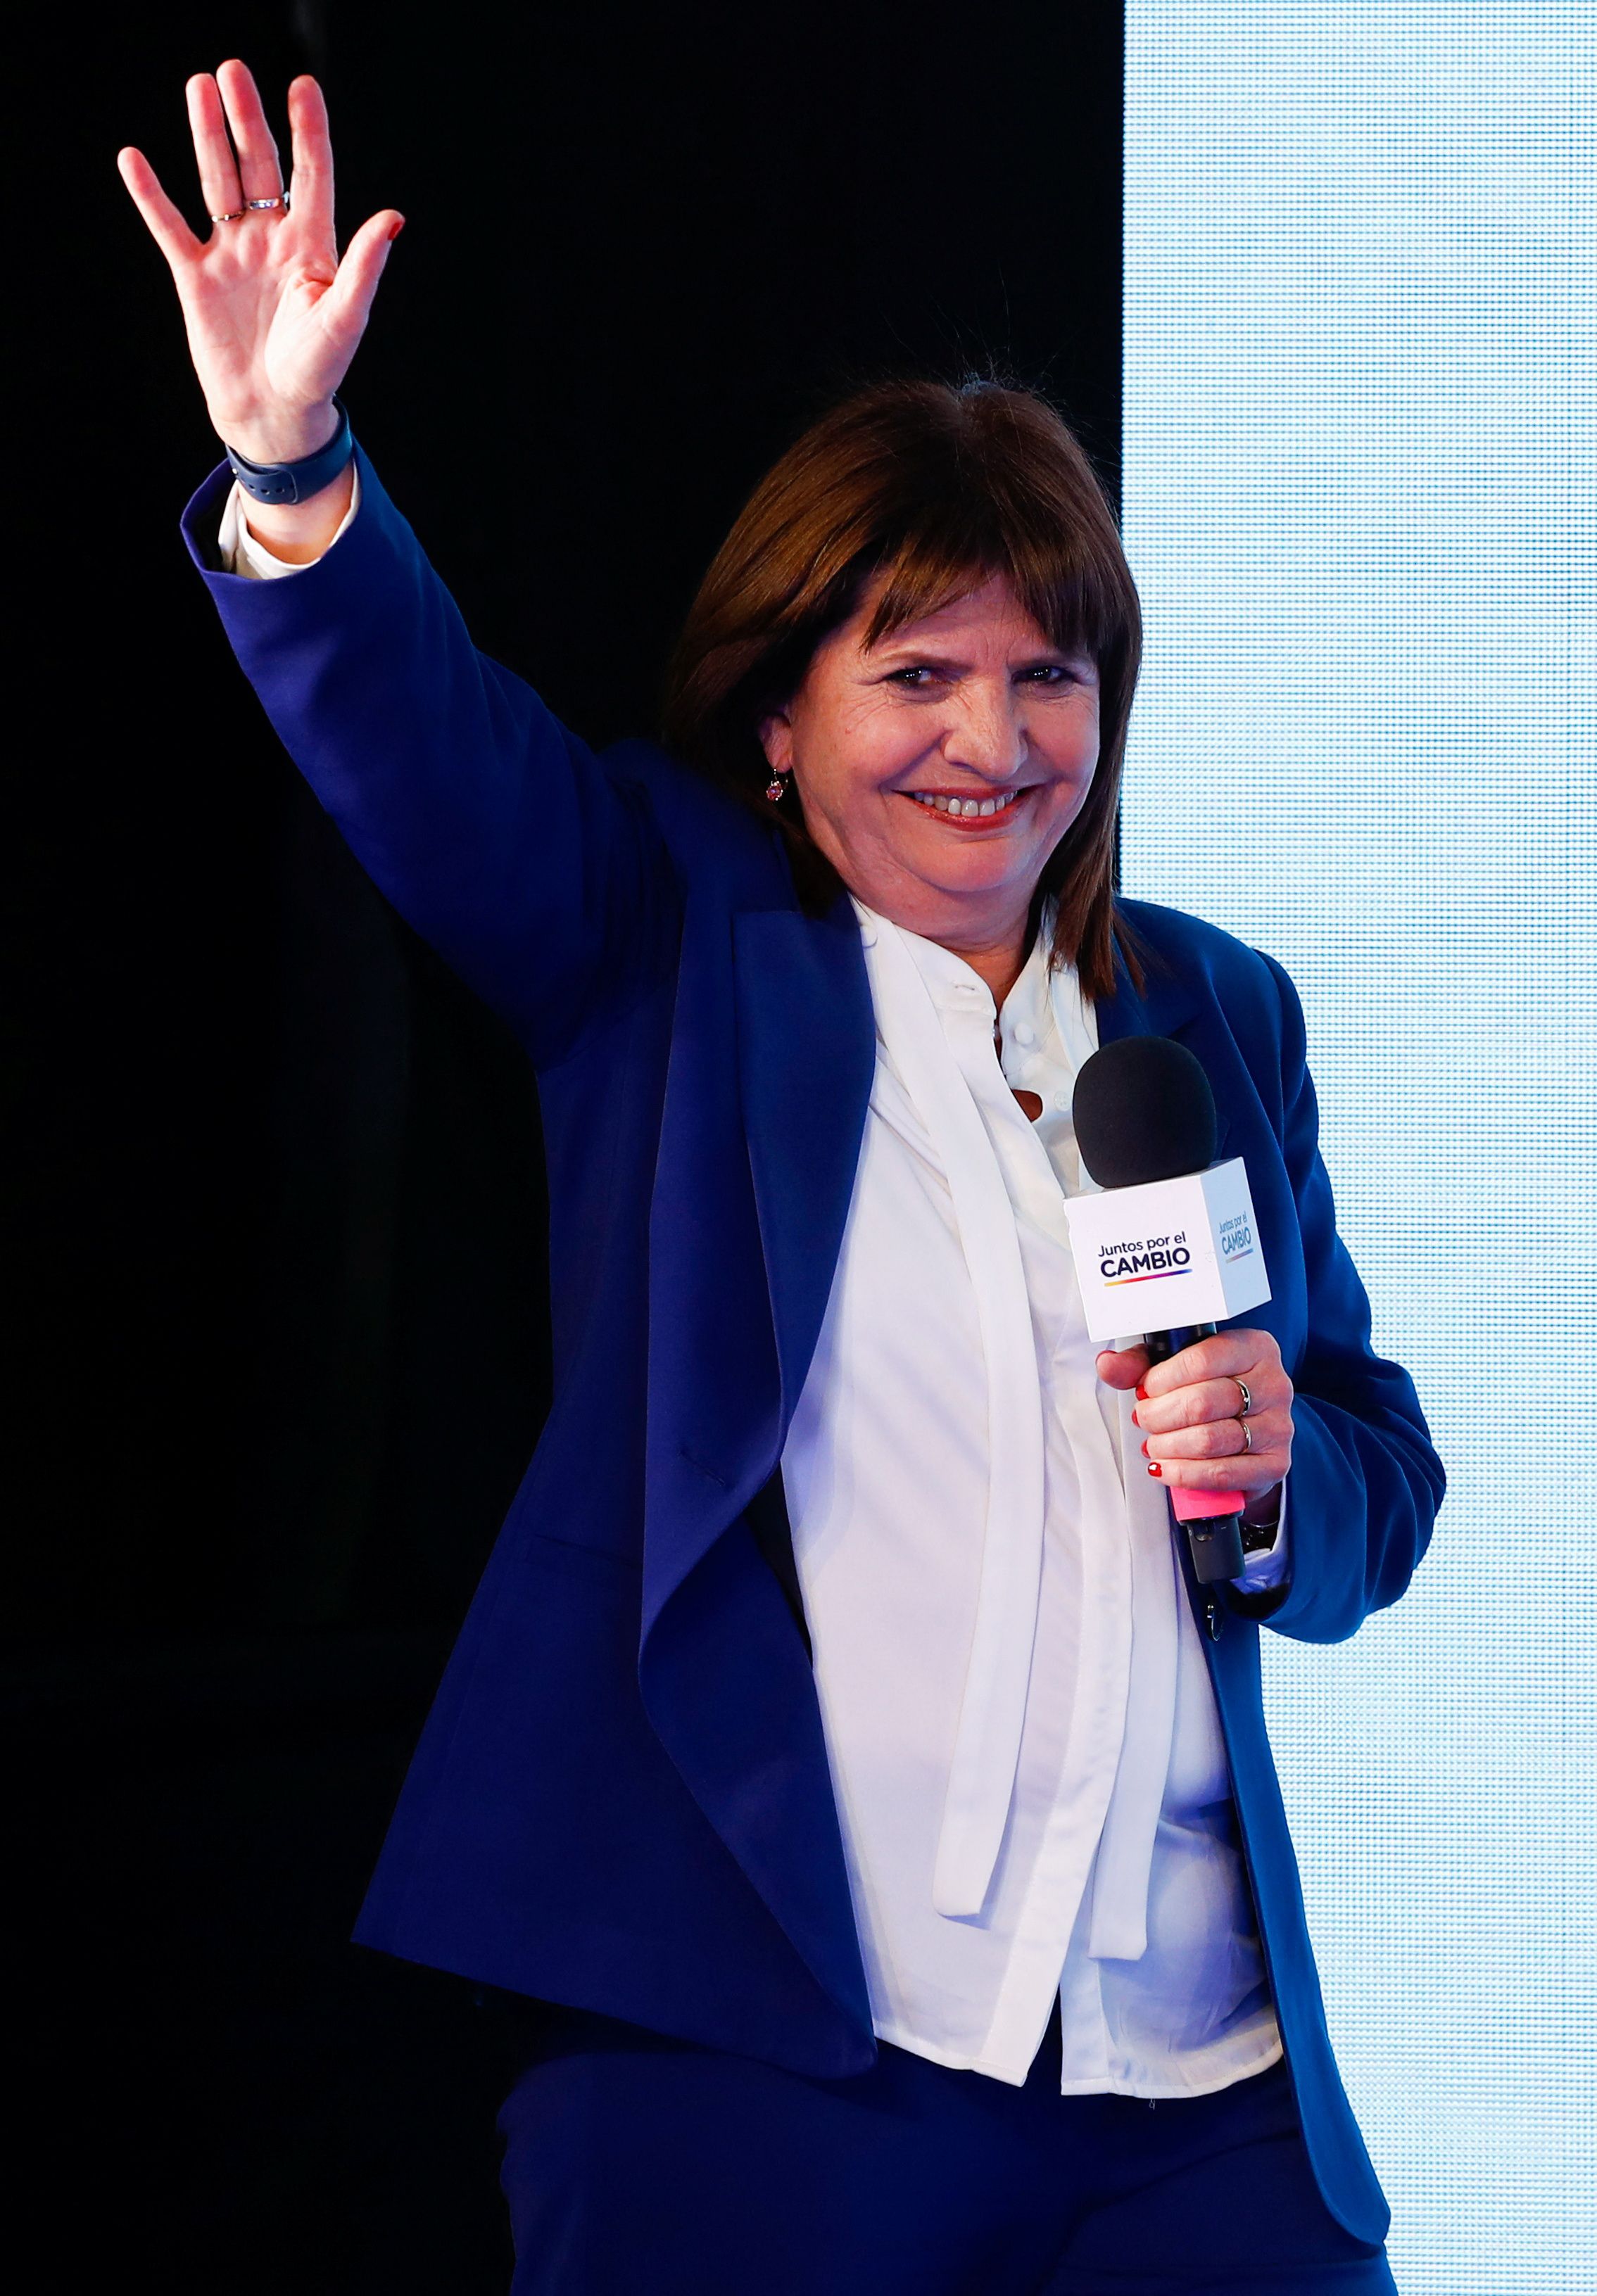 Patricia Bullrich managed to become the Together for Change candidate for the presidency REUTERS/Agustin Marcarian